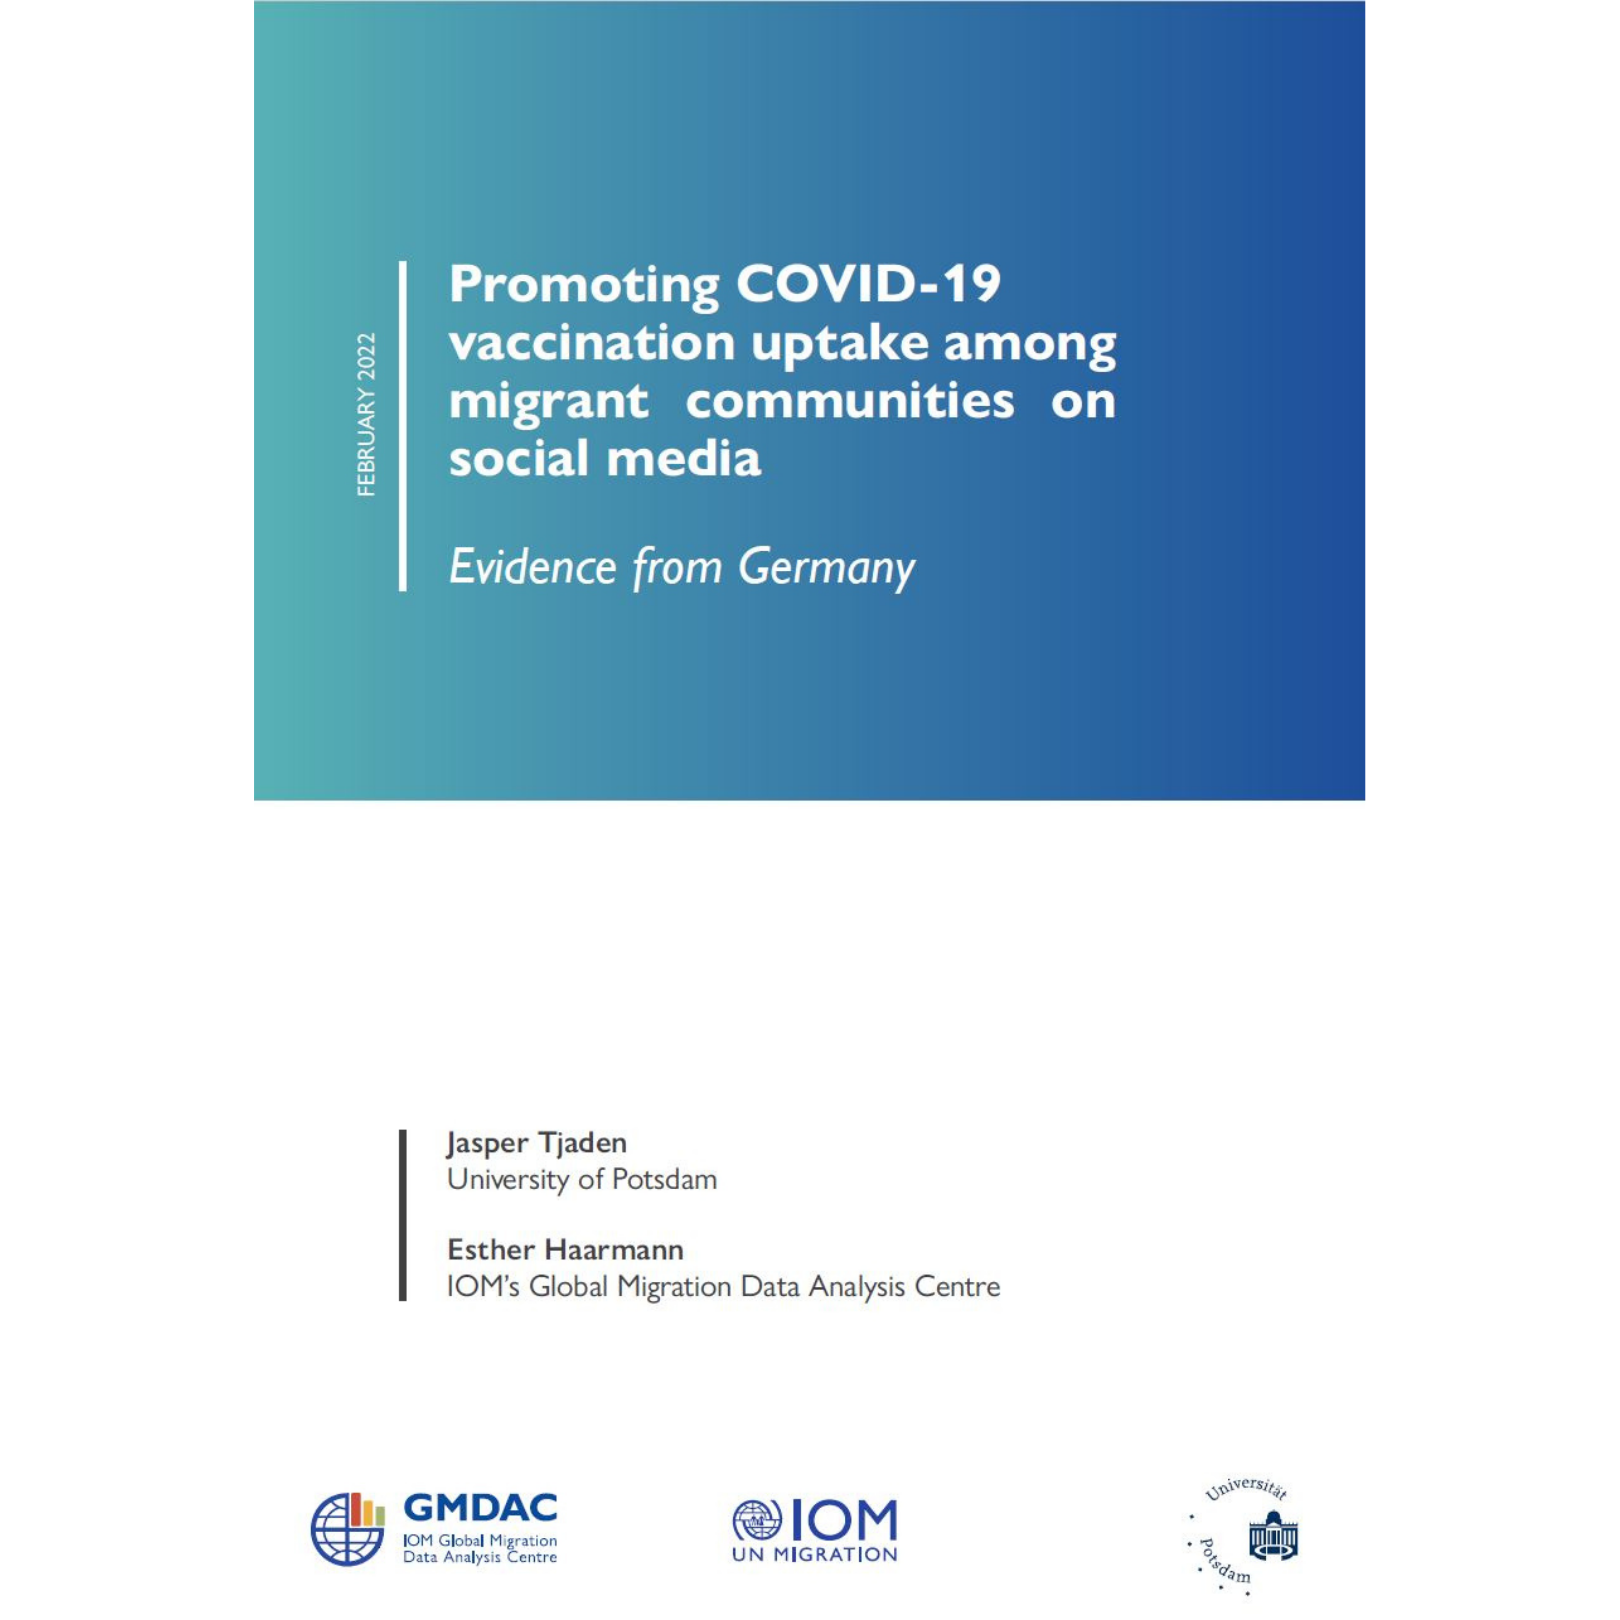 Promoting COVID-19 vaccination uptake among migrant communities on social media